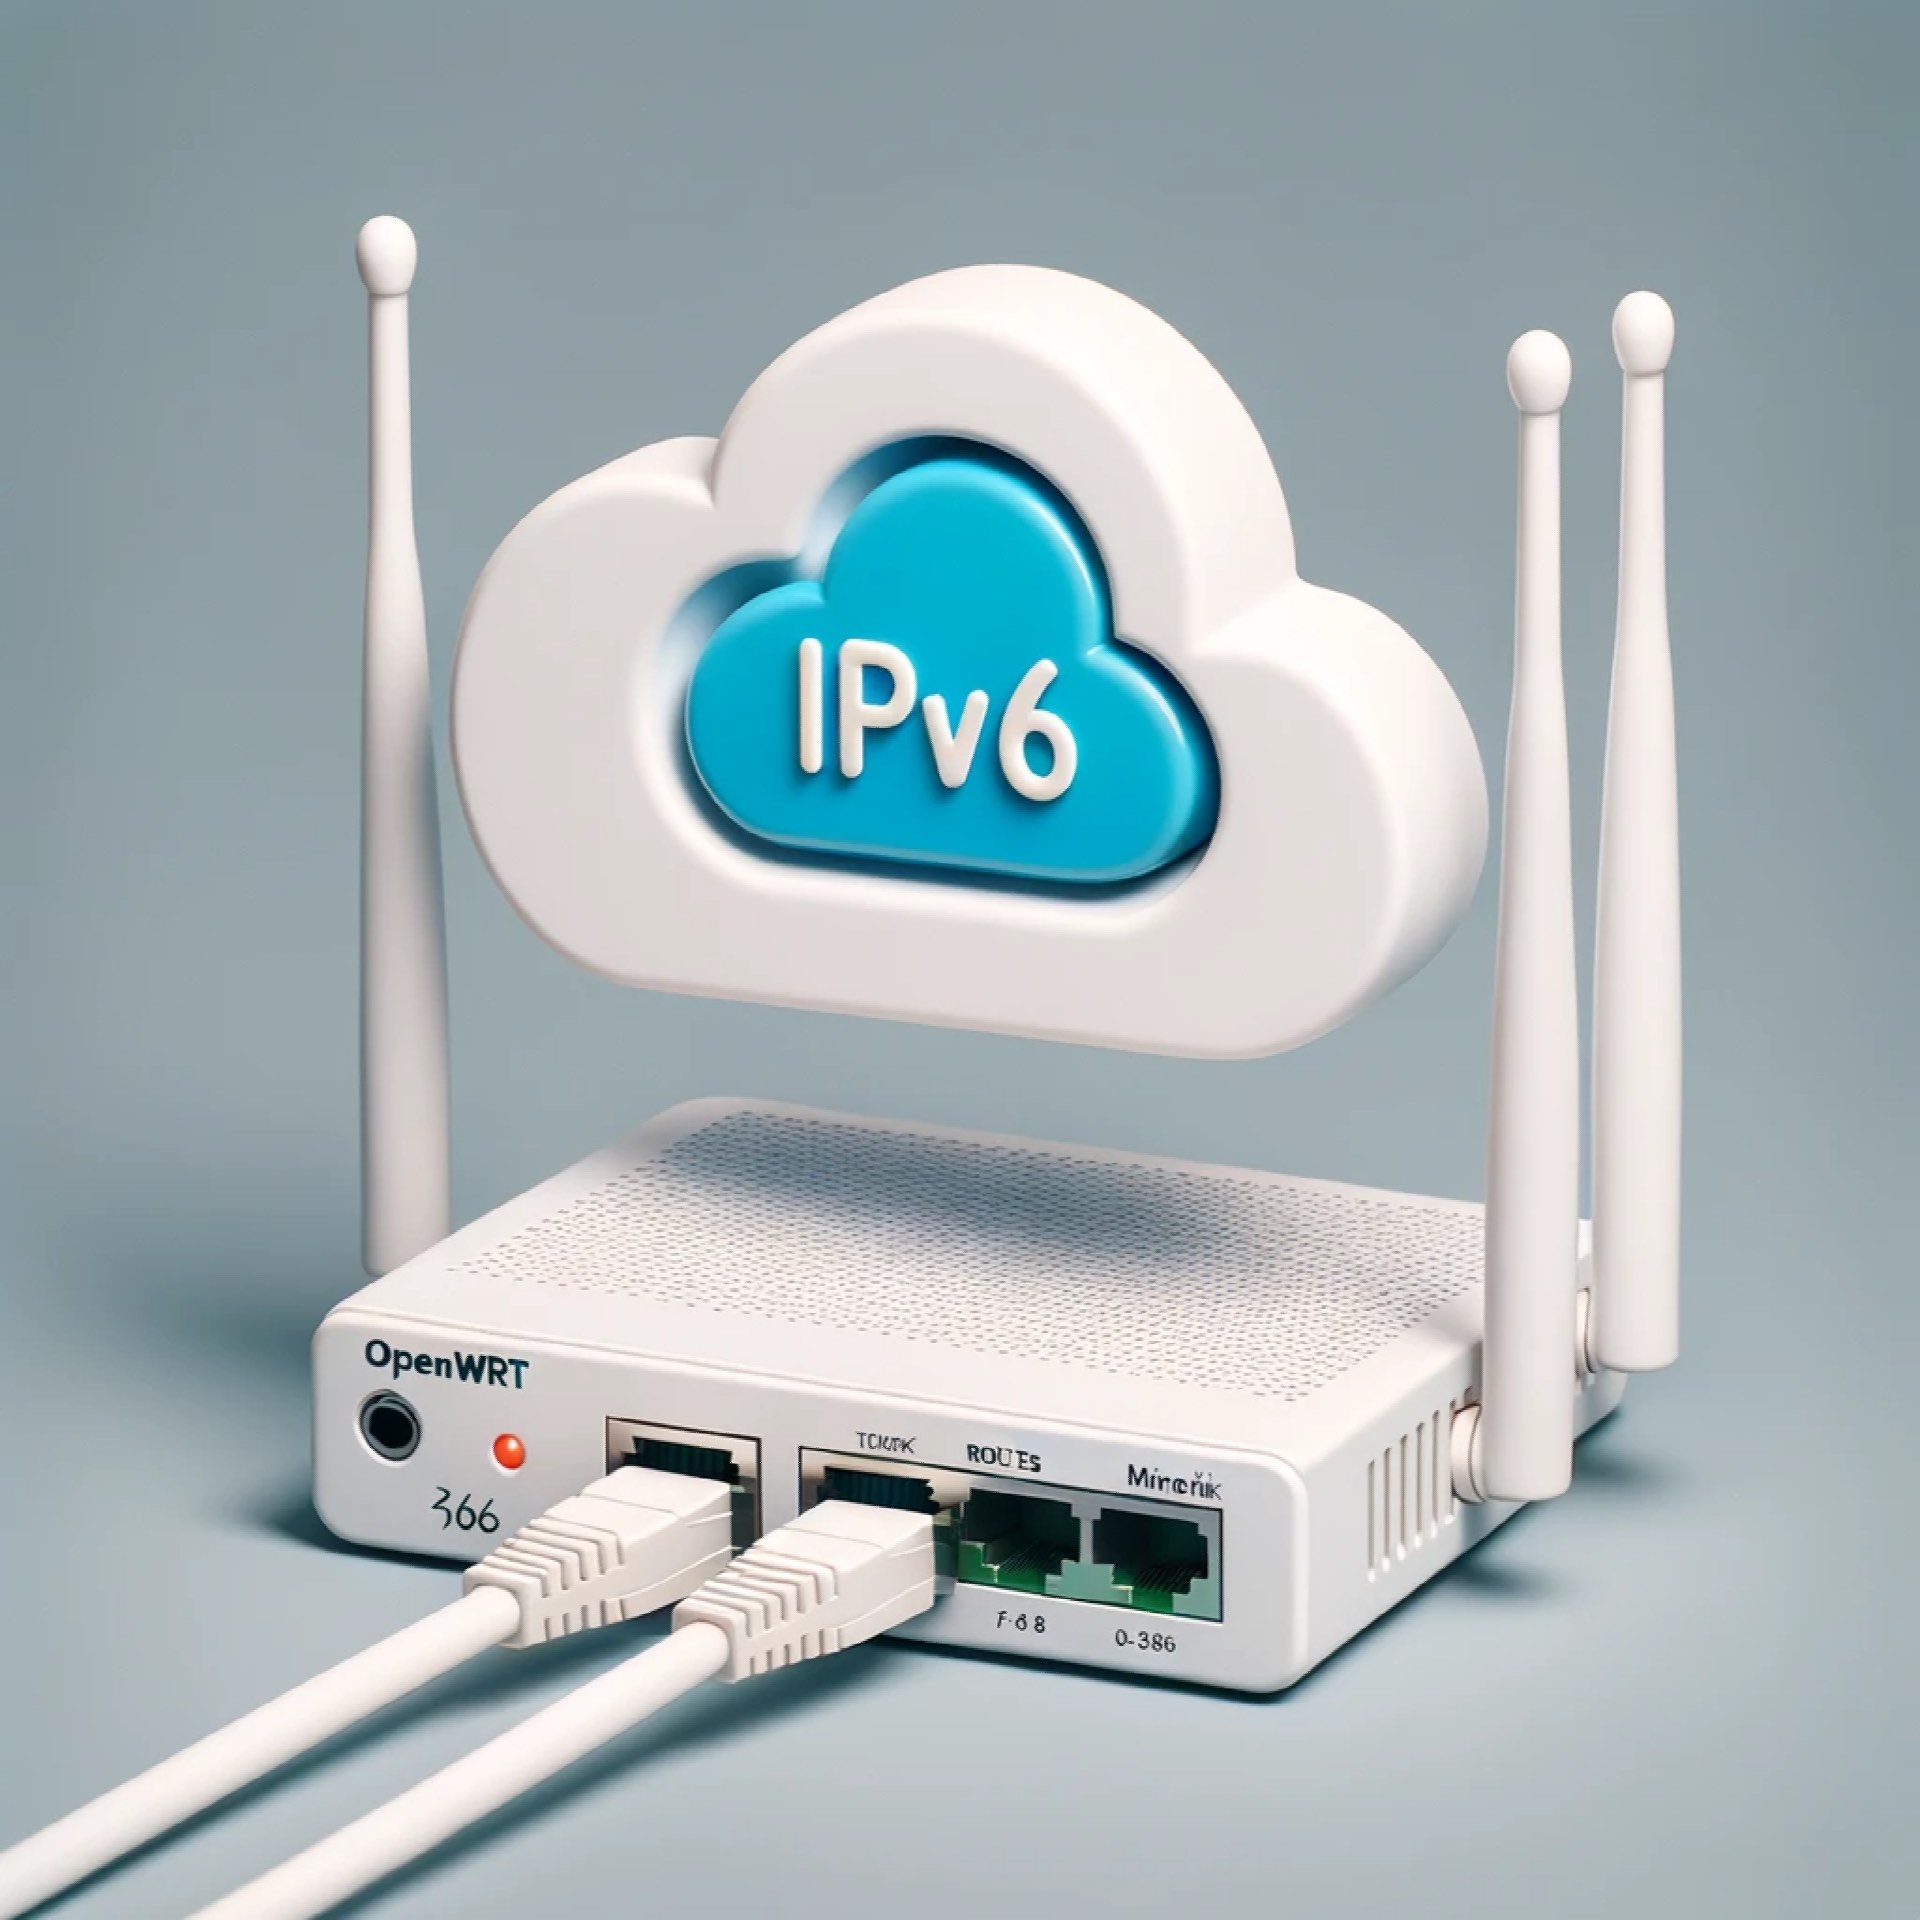 DALLE - photo of two routers connected by a cable. One router has a label &lsquo;OpenWRT&rsquo; and the other &lsquo;Mikrotik RouterOS&rsquo;. Above them is a cloud symbol with &lsquo;IPv6